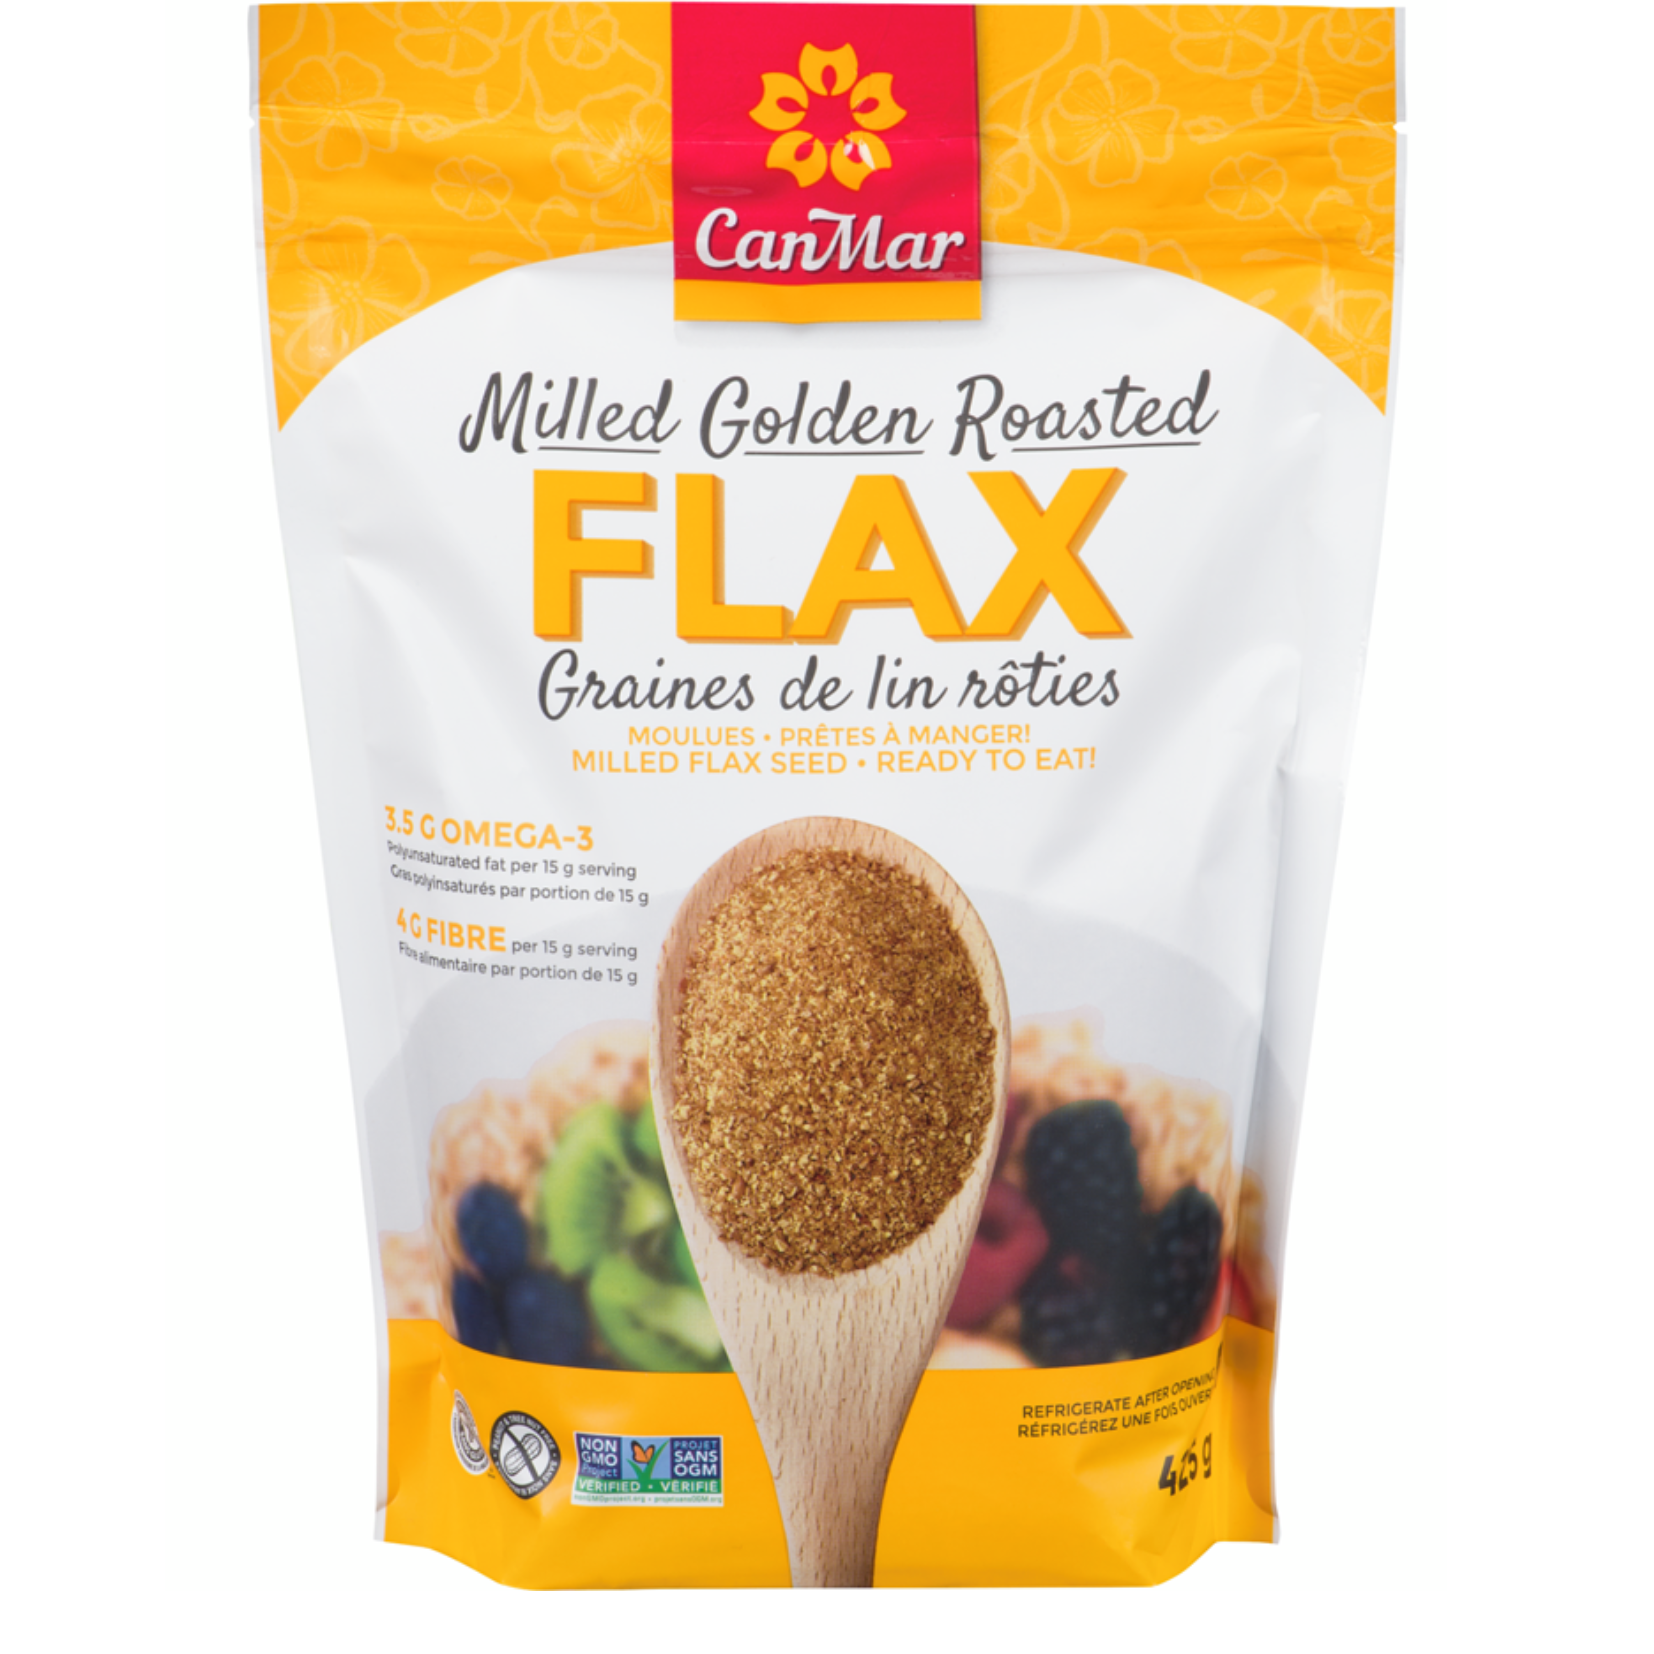 CanMar Milled Golden Roasted Flax Seed 425g